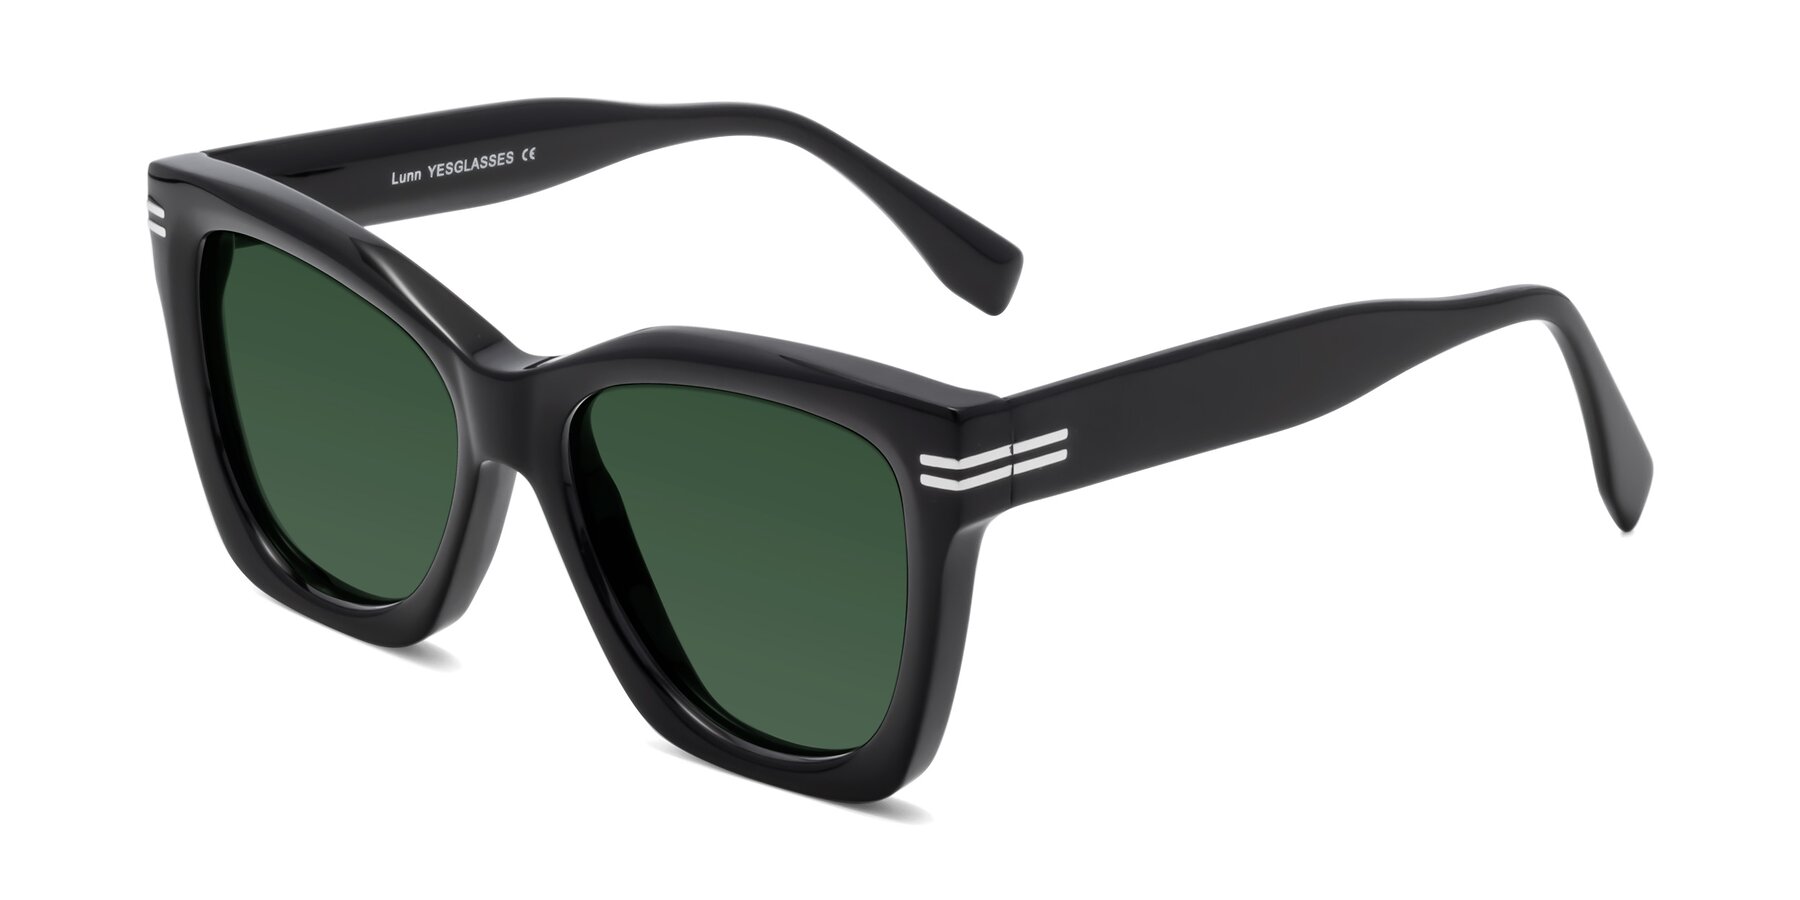 Angle of Lunn in Black with Green Tinted Lenses